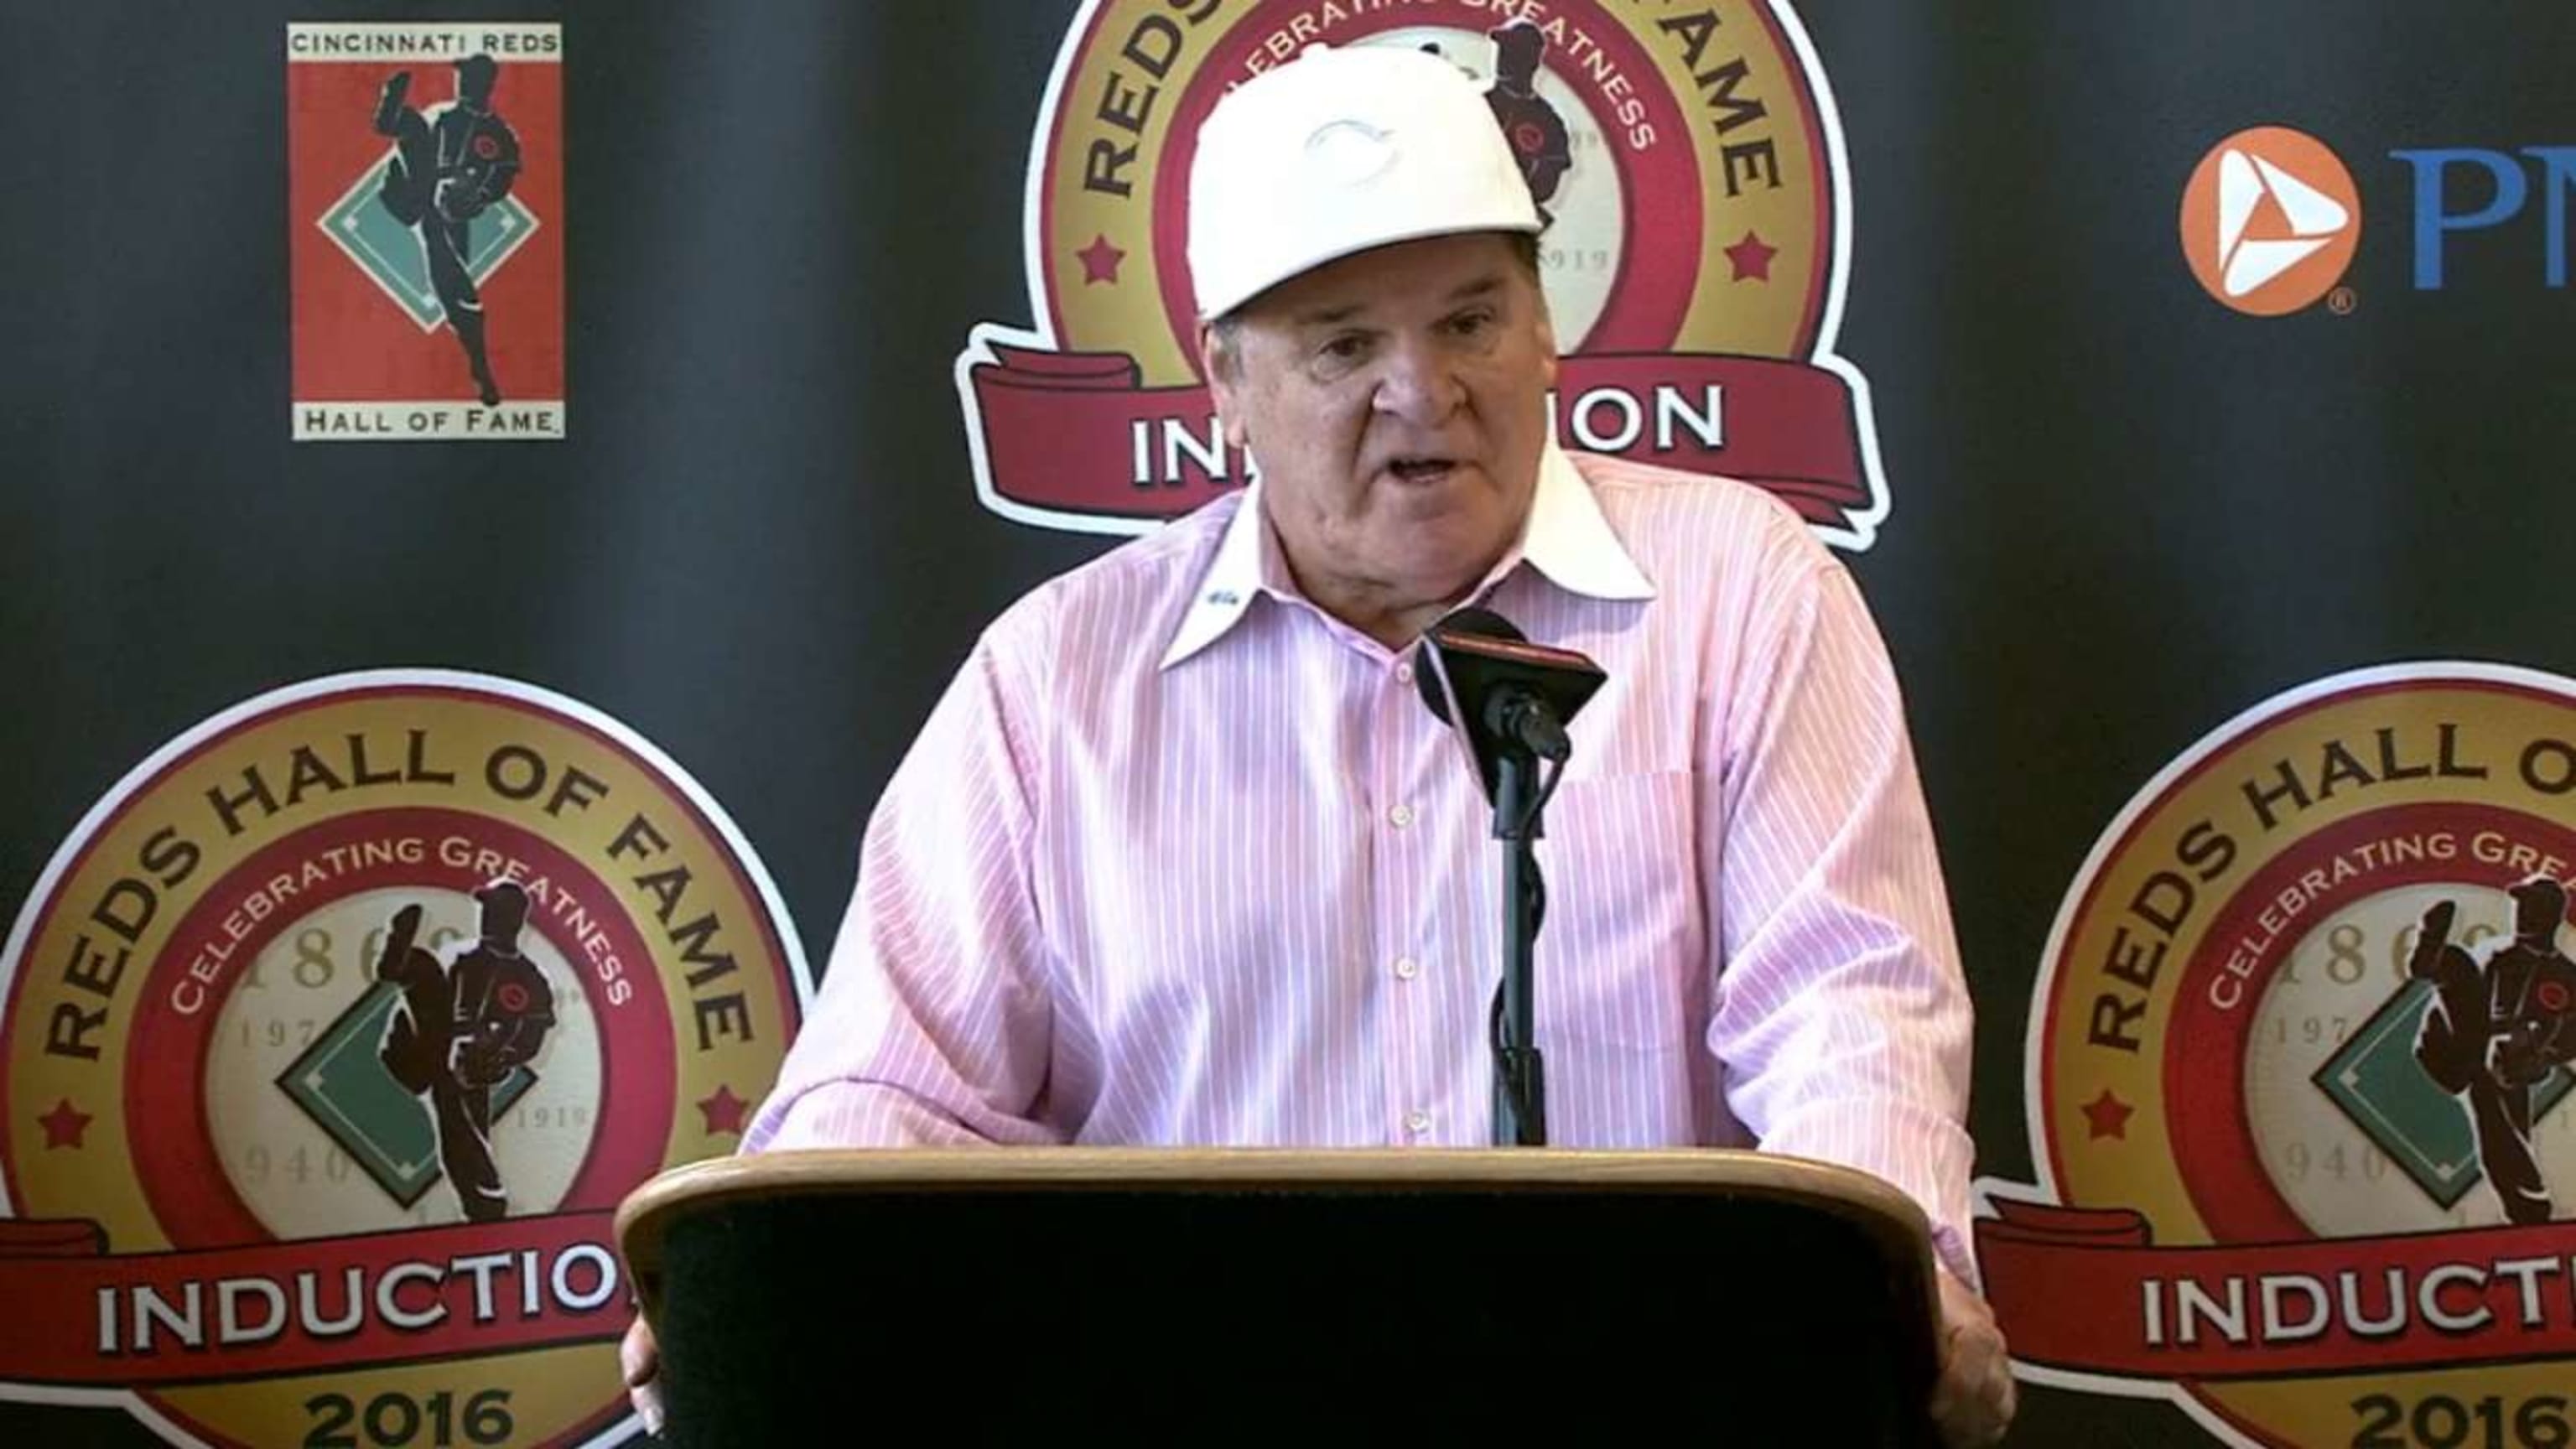 Pete Rose to have number retired by Reds